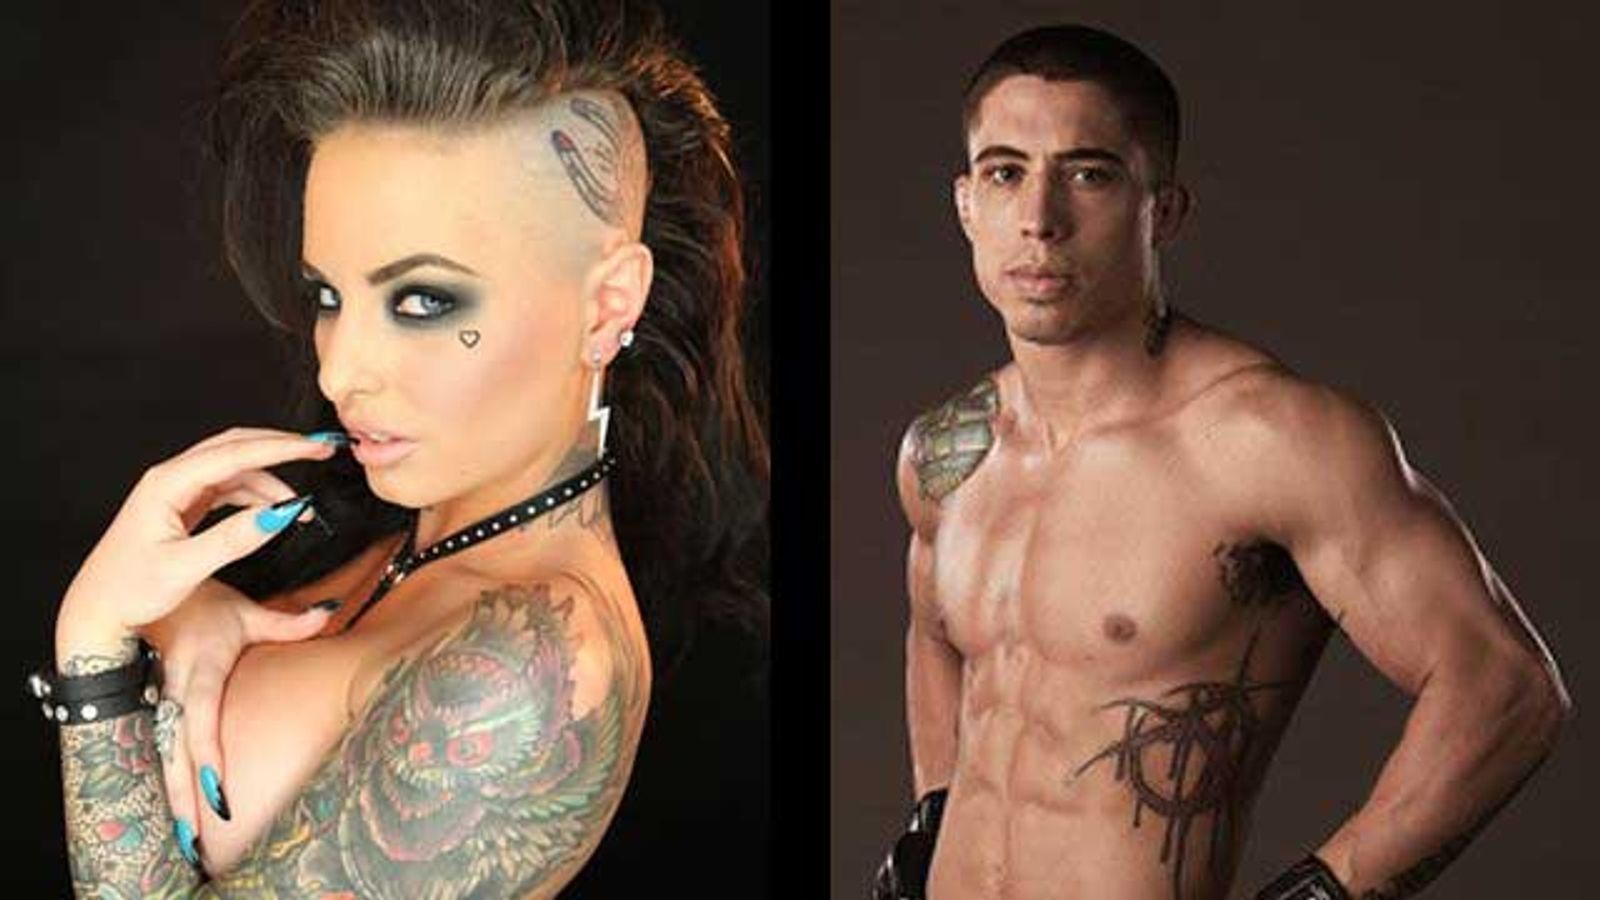 annie mosier recommends christy mack new movie pic